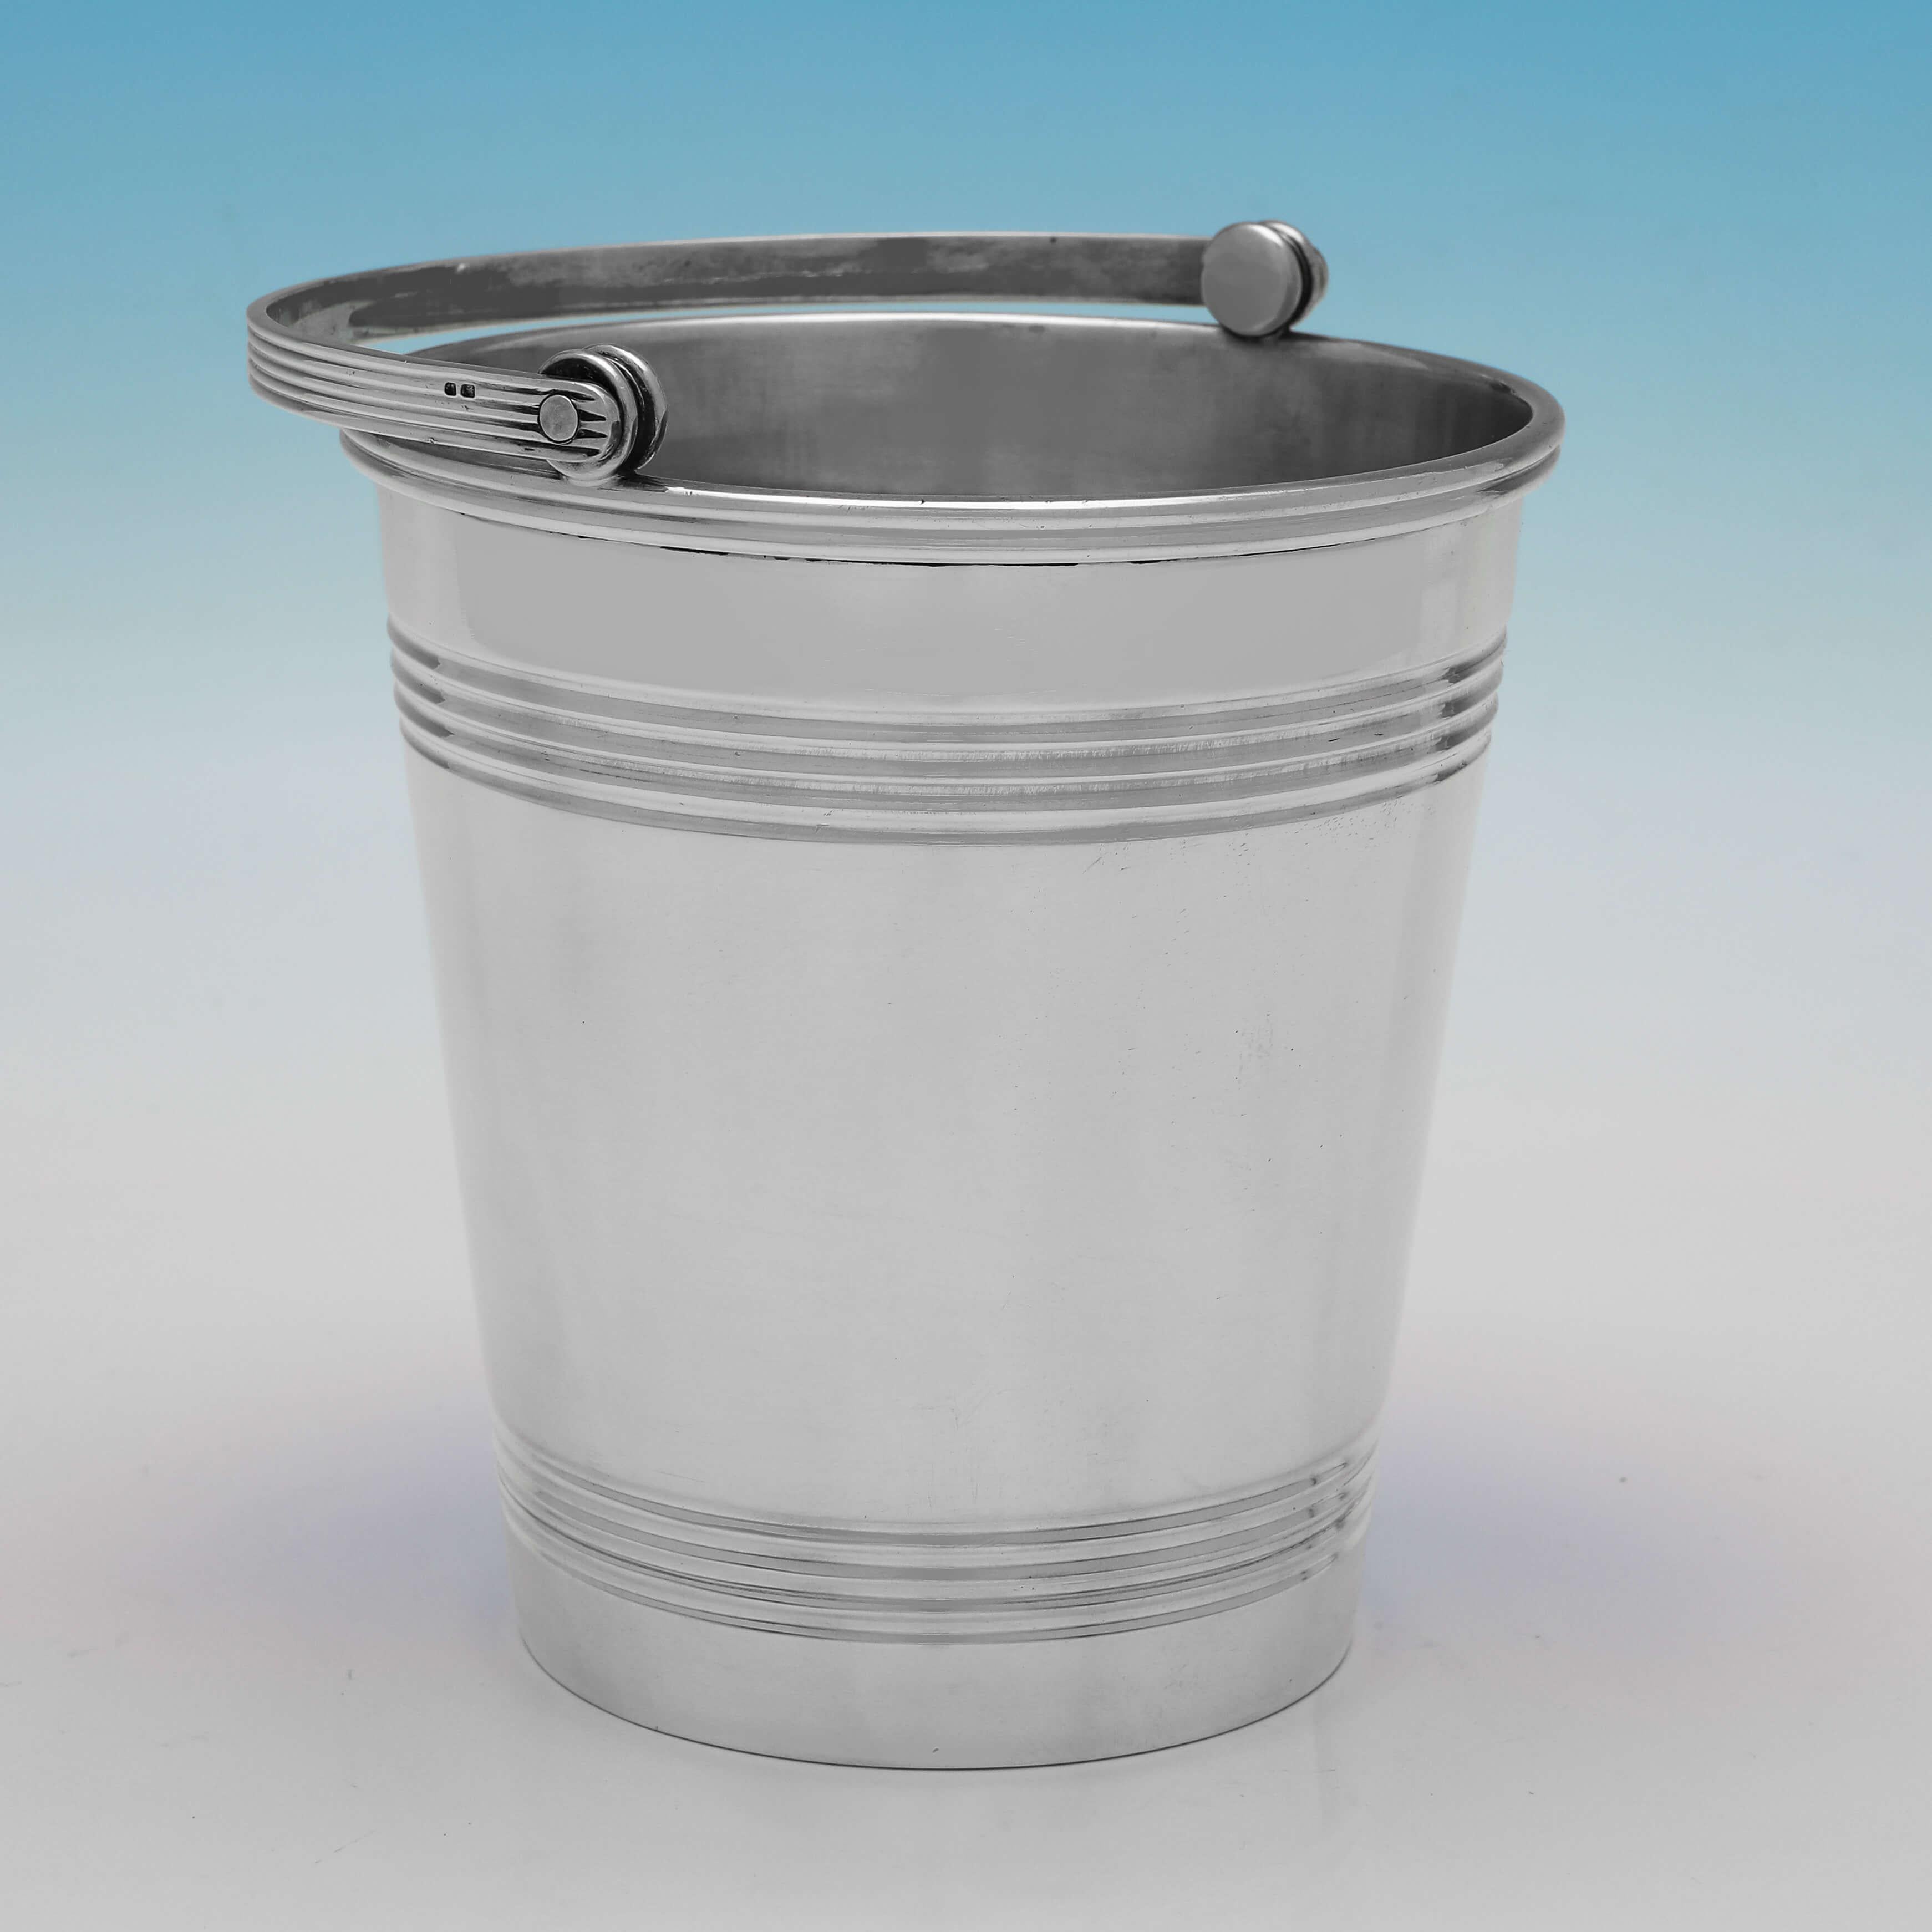 Hallmarked in London in 1937 by Goldsmiths & Silversmiths Co., this handsome, Sterling Silver Ice Bucket, is bucket shaped, featuring reed detailing, and a removable drainer. 

The ice bucket measures 5